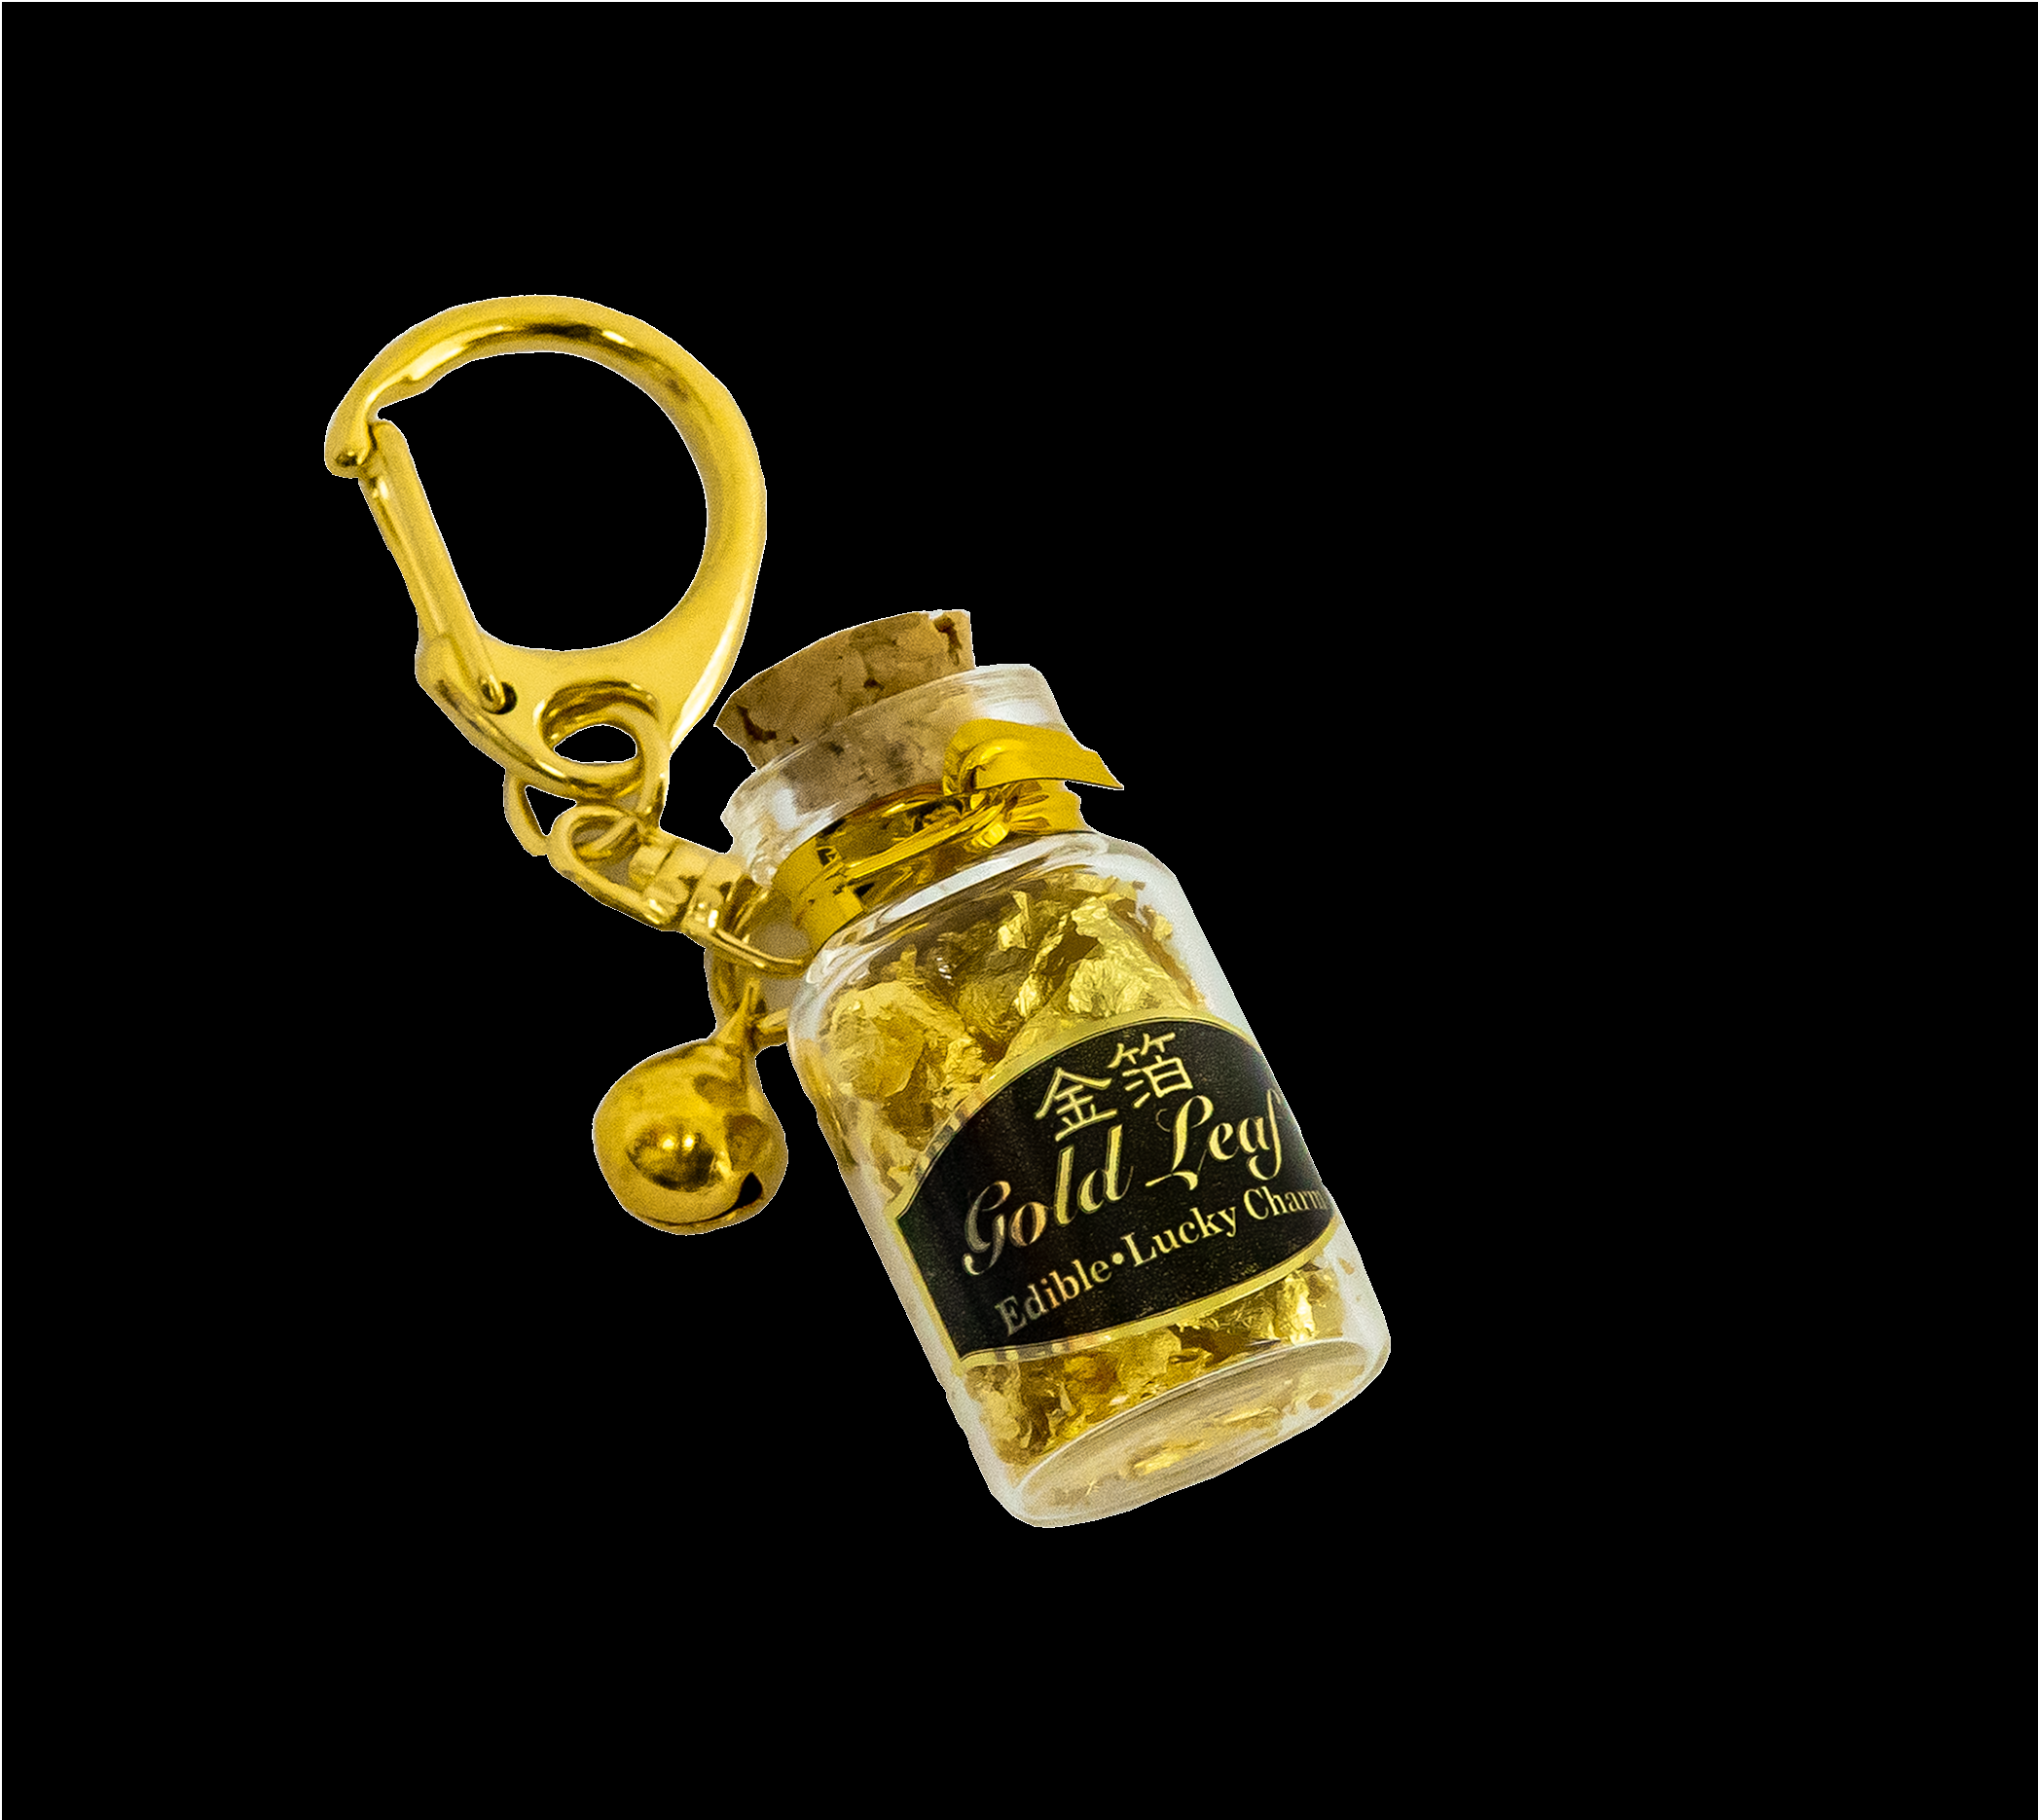 Gold leaf in a small bottle (Original Package)